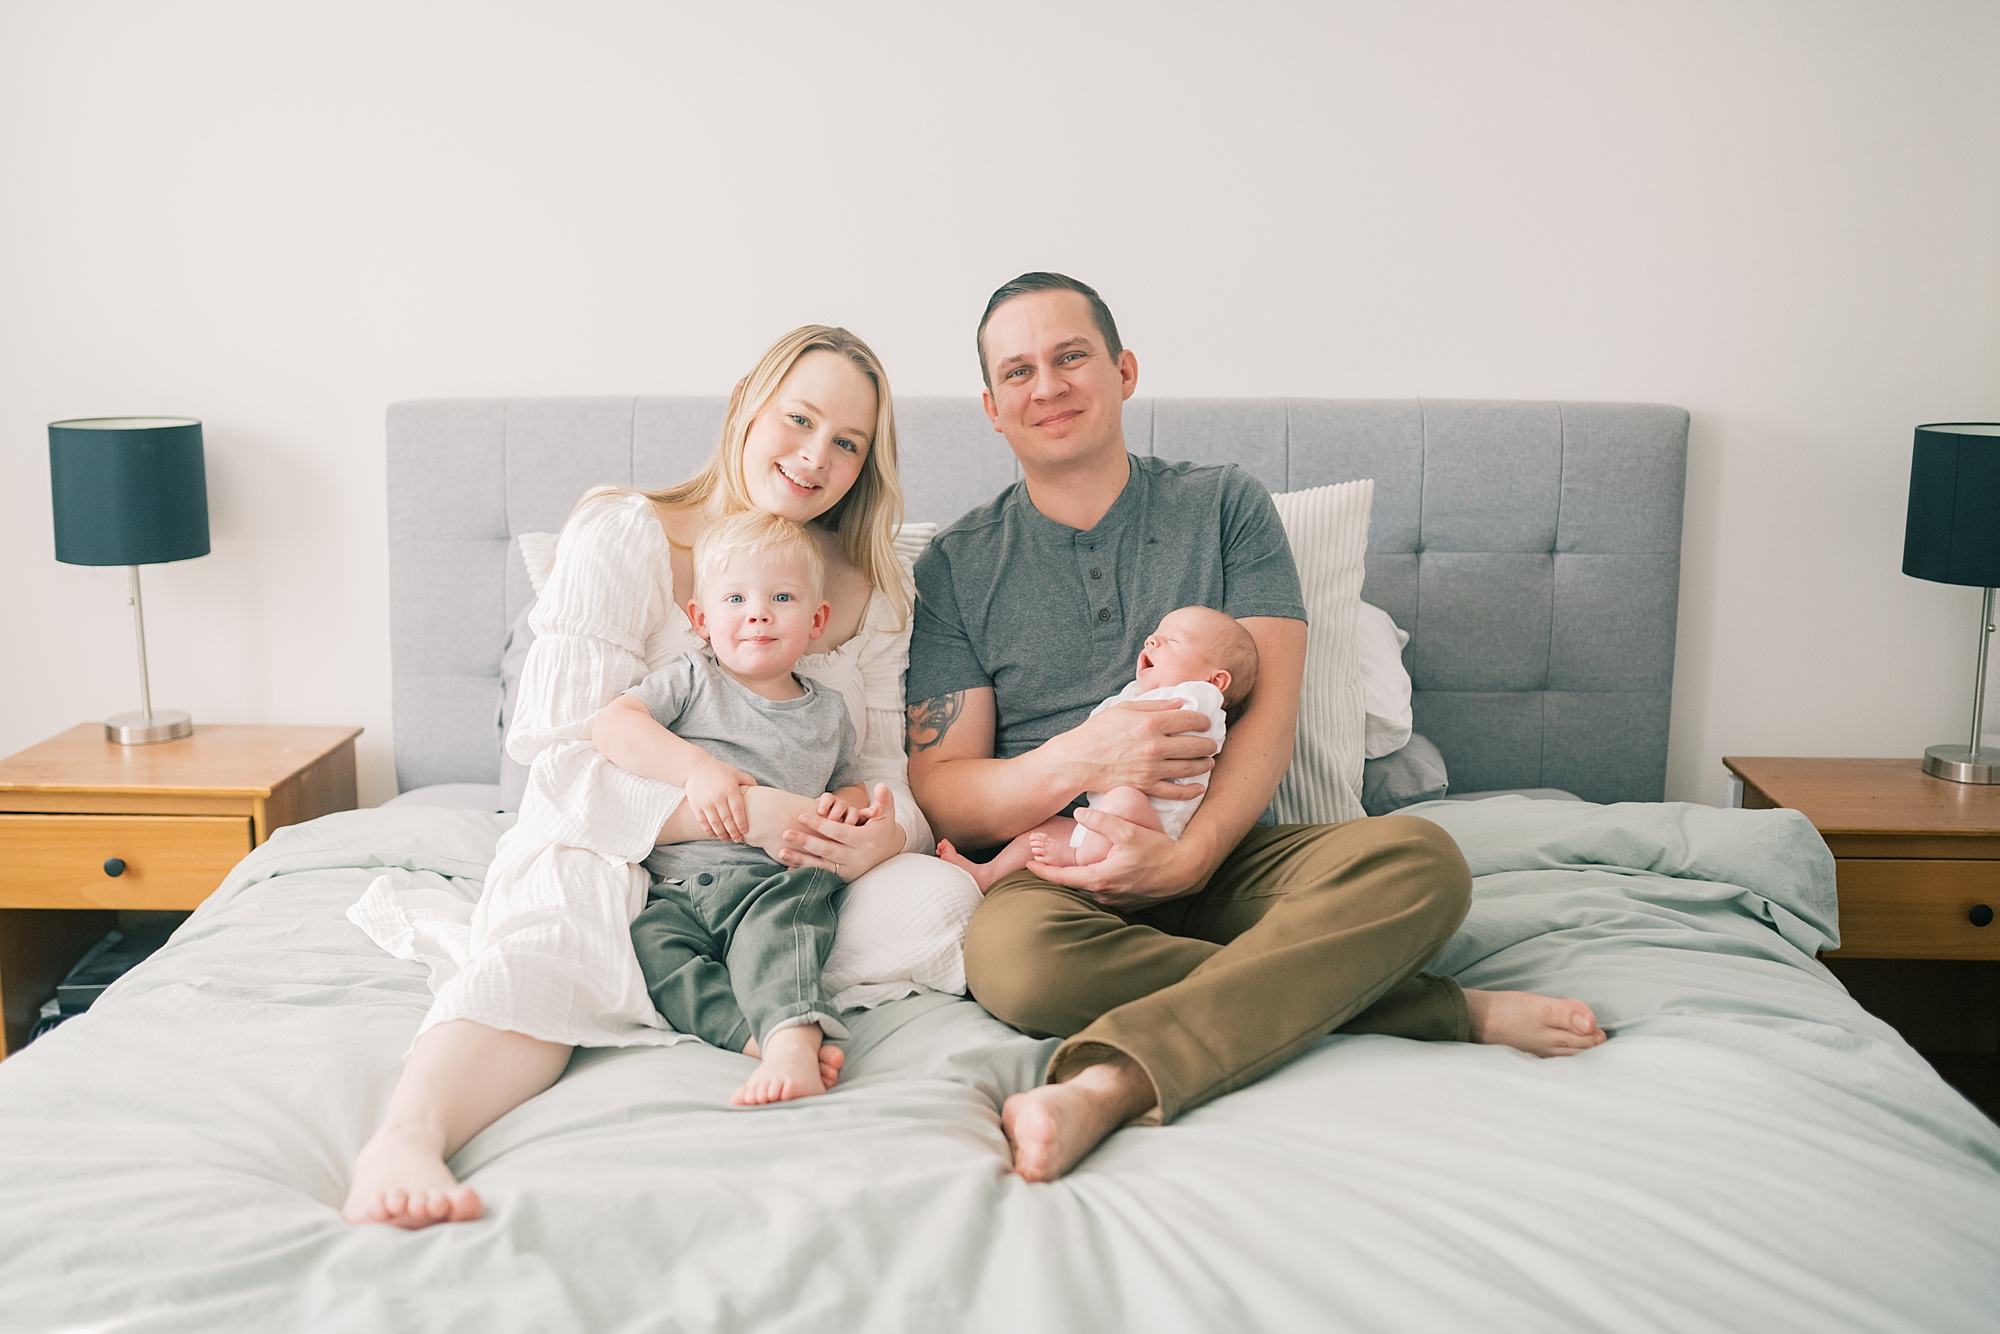 in-home newborn session for new baby boy in Leonardtown MD for family of four